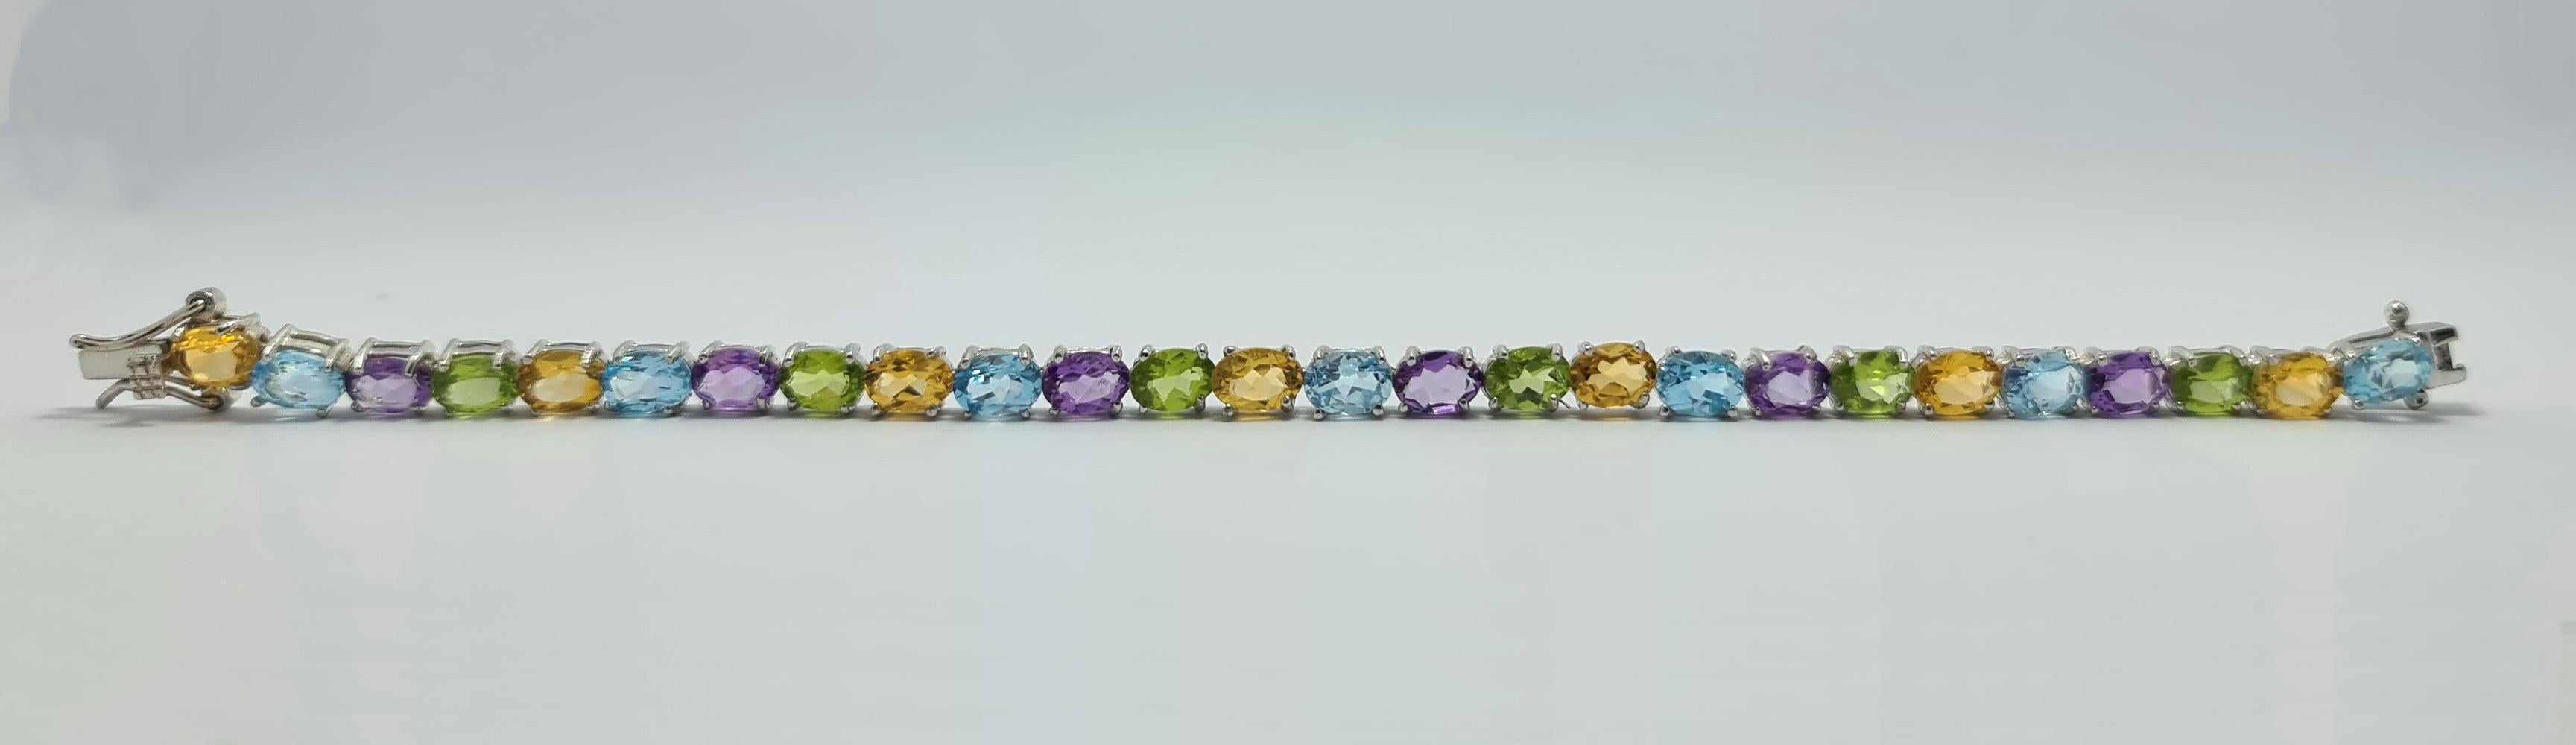 Brand New Sterling Silver Tennis Bracelet with Natural Blue Topaz, Citrine, Amethyst, and Peridot.
Sterling Silver is Rhodium Plated.
The Length is 7 inches.
The weight is 16 grams